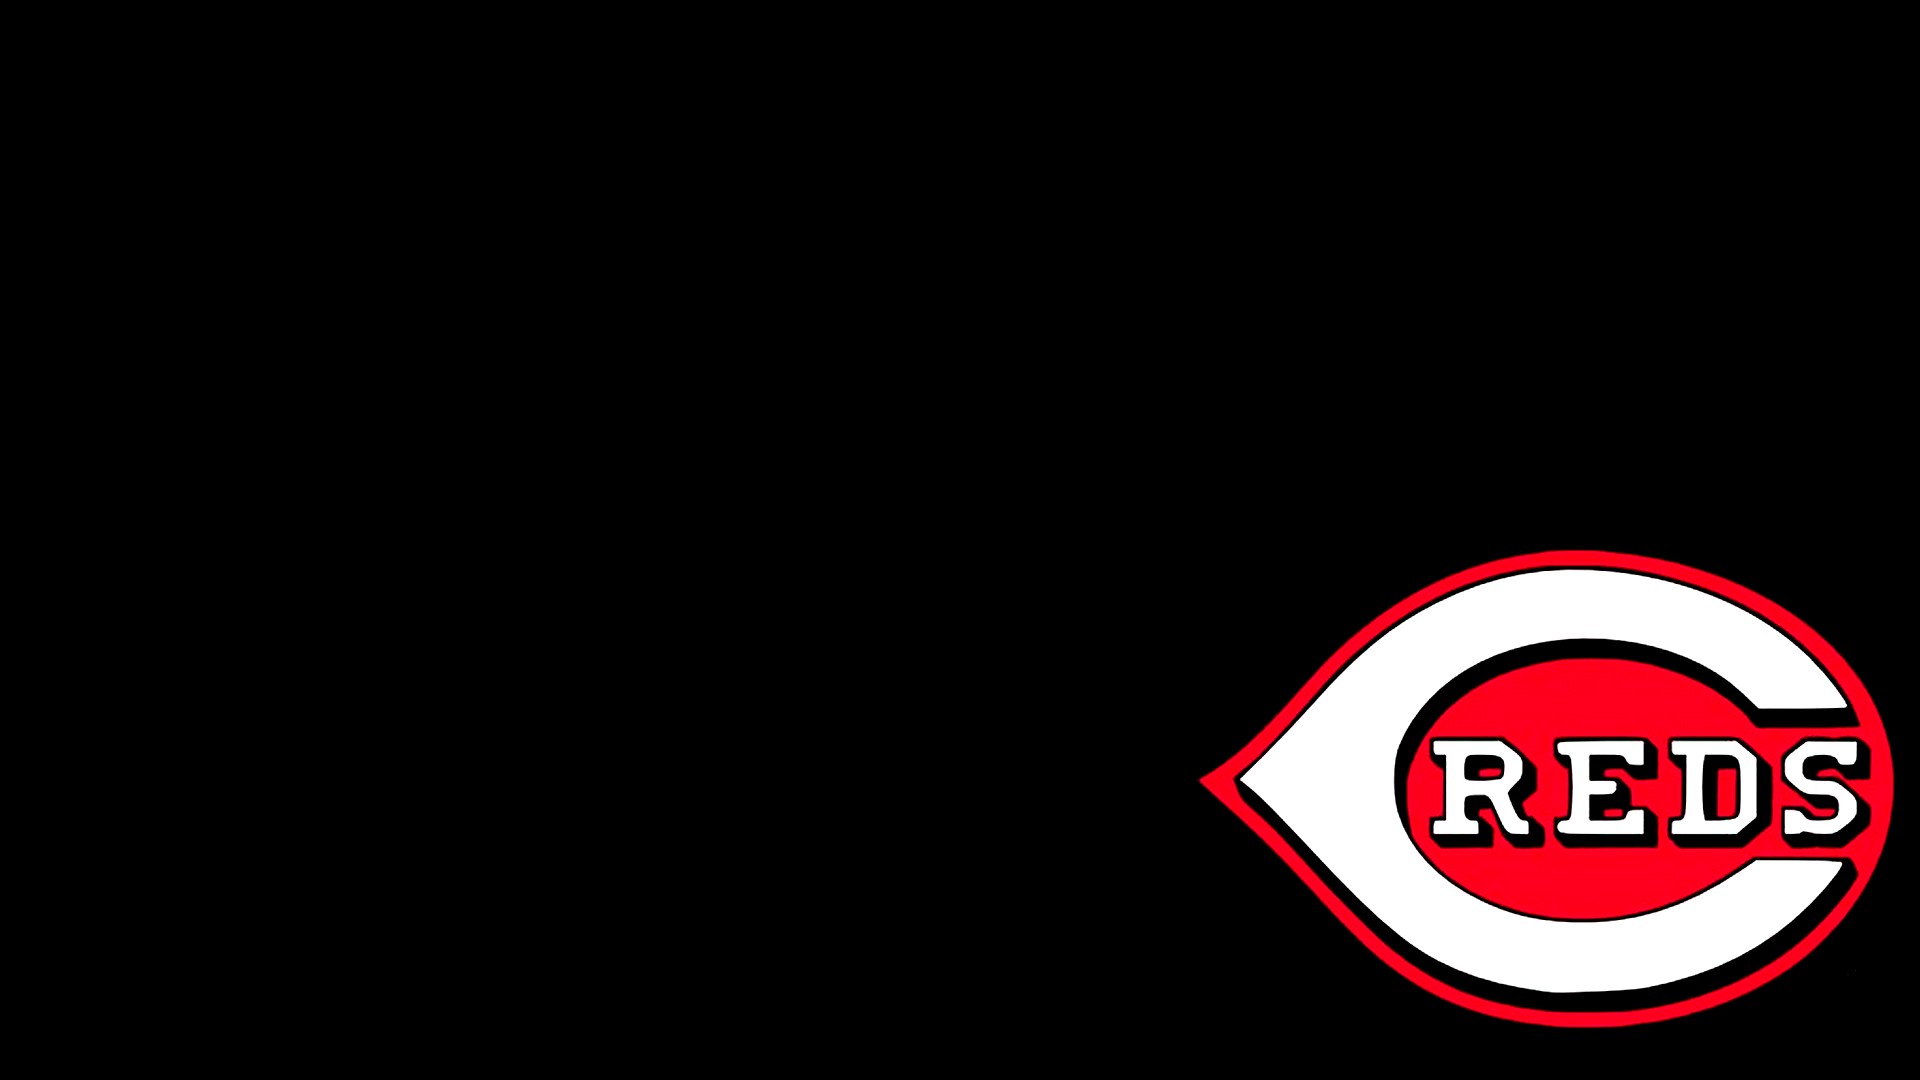 Cincinnati Reds Wallpaper with high-resolution 1920x1080 pixel. You can use this wallpaper for Mac Desktop Wallpaper, Laptop Screensavers, Android Wallpapers, Tablet or iPhone Home Screen and another mobile phone device